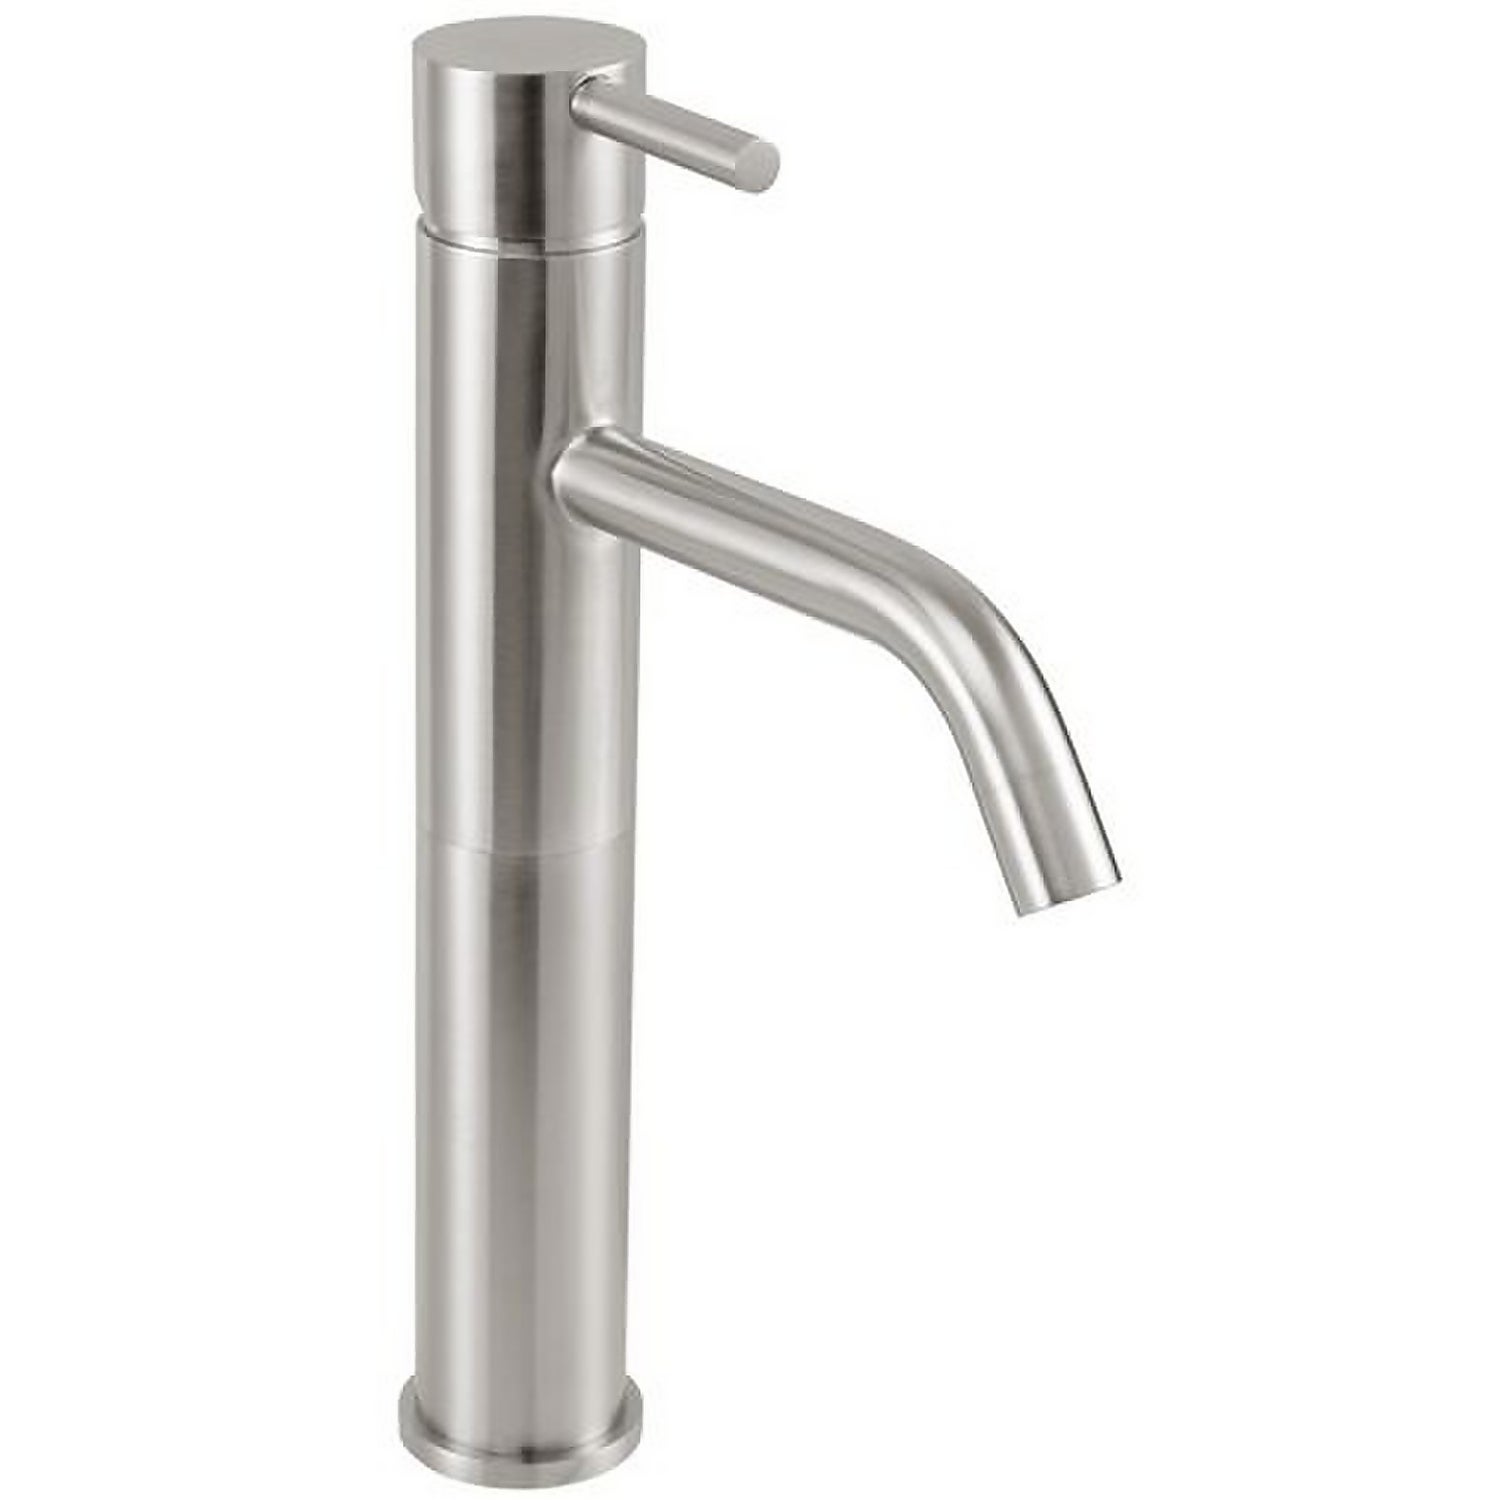 Forge Stainless Steel Washbowl Basin Mixer Tap